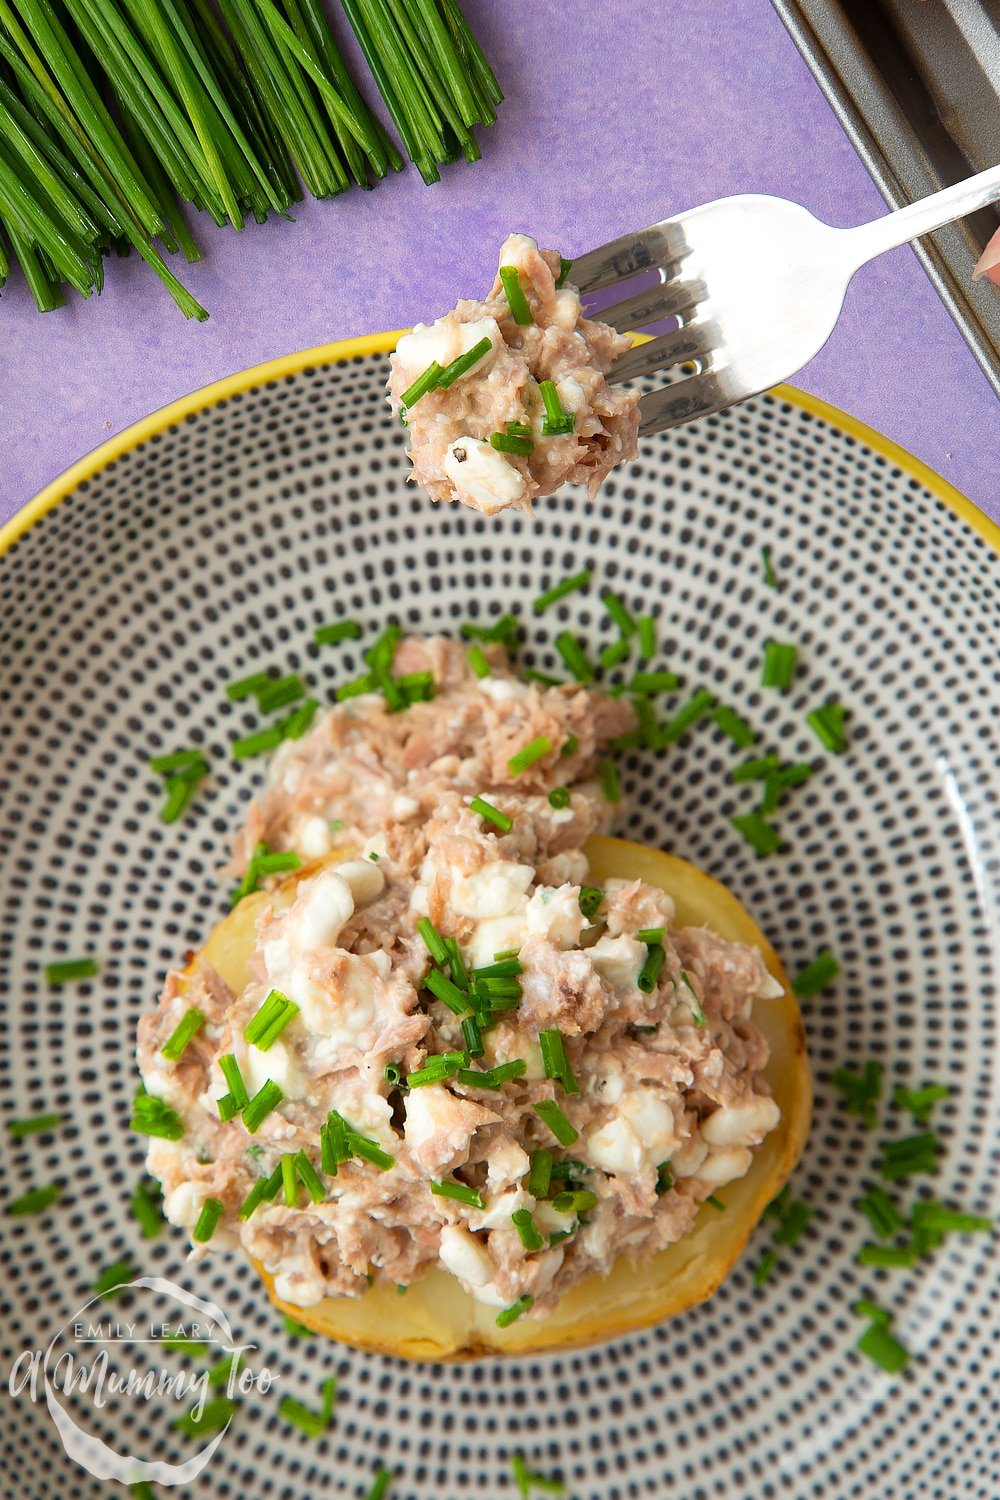 Overhead view of the low-fat tuna cheese jacket potato ready to be eaten. 